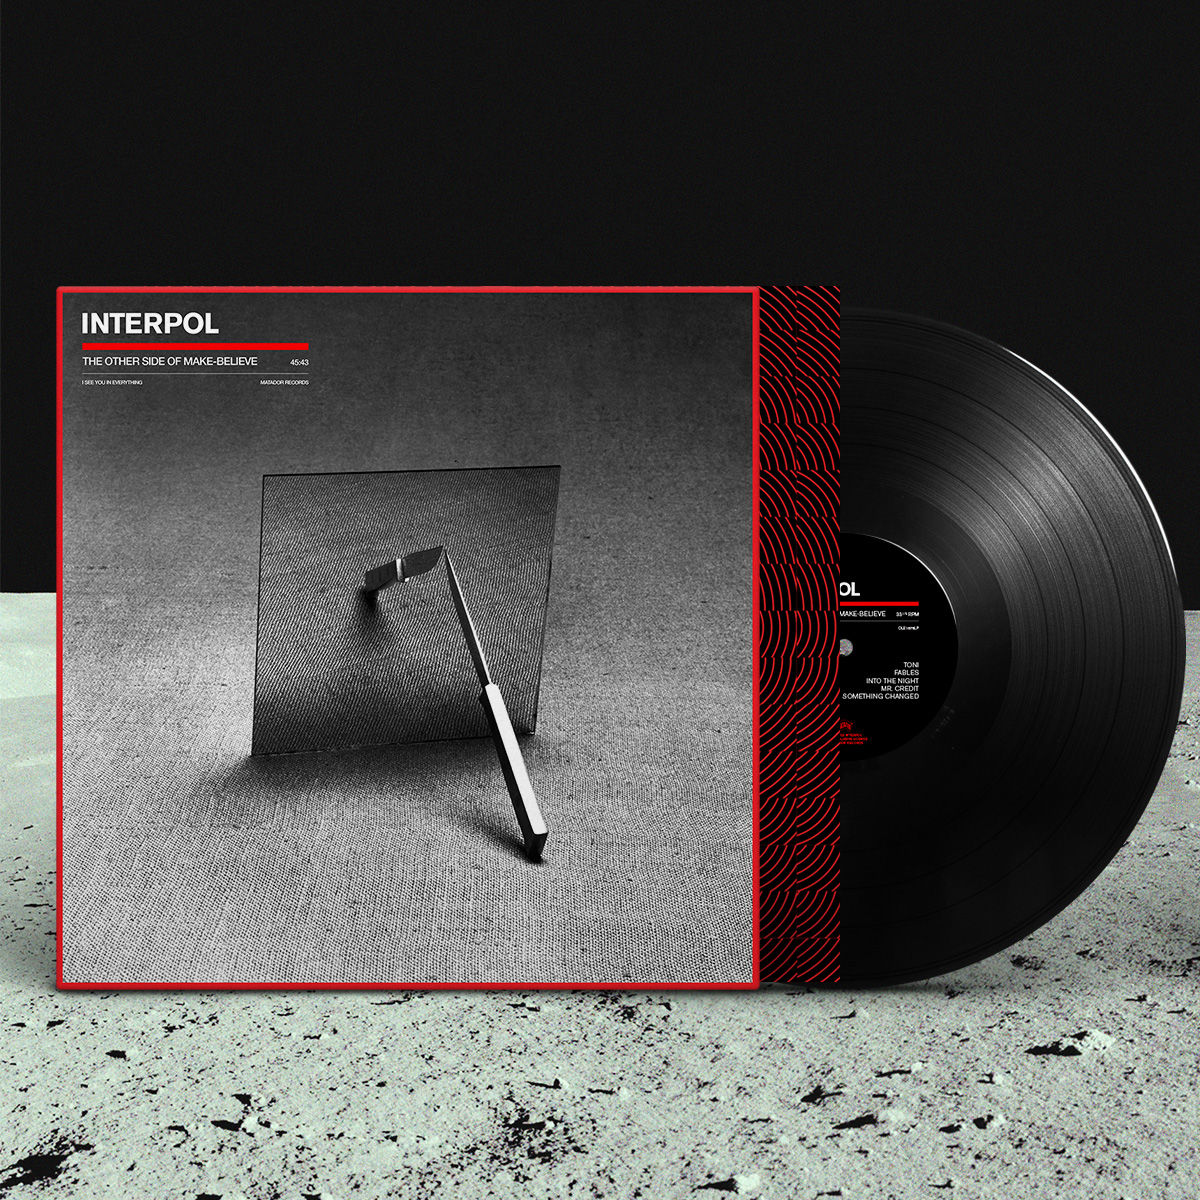 Interpol - The Other Side of Make-Believe: Vinyl LP